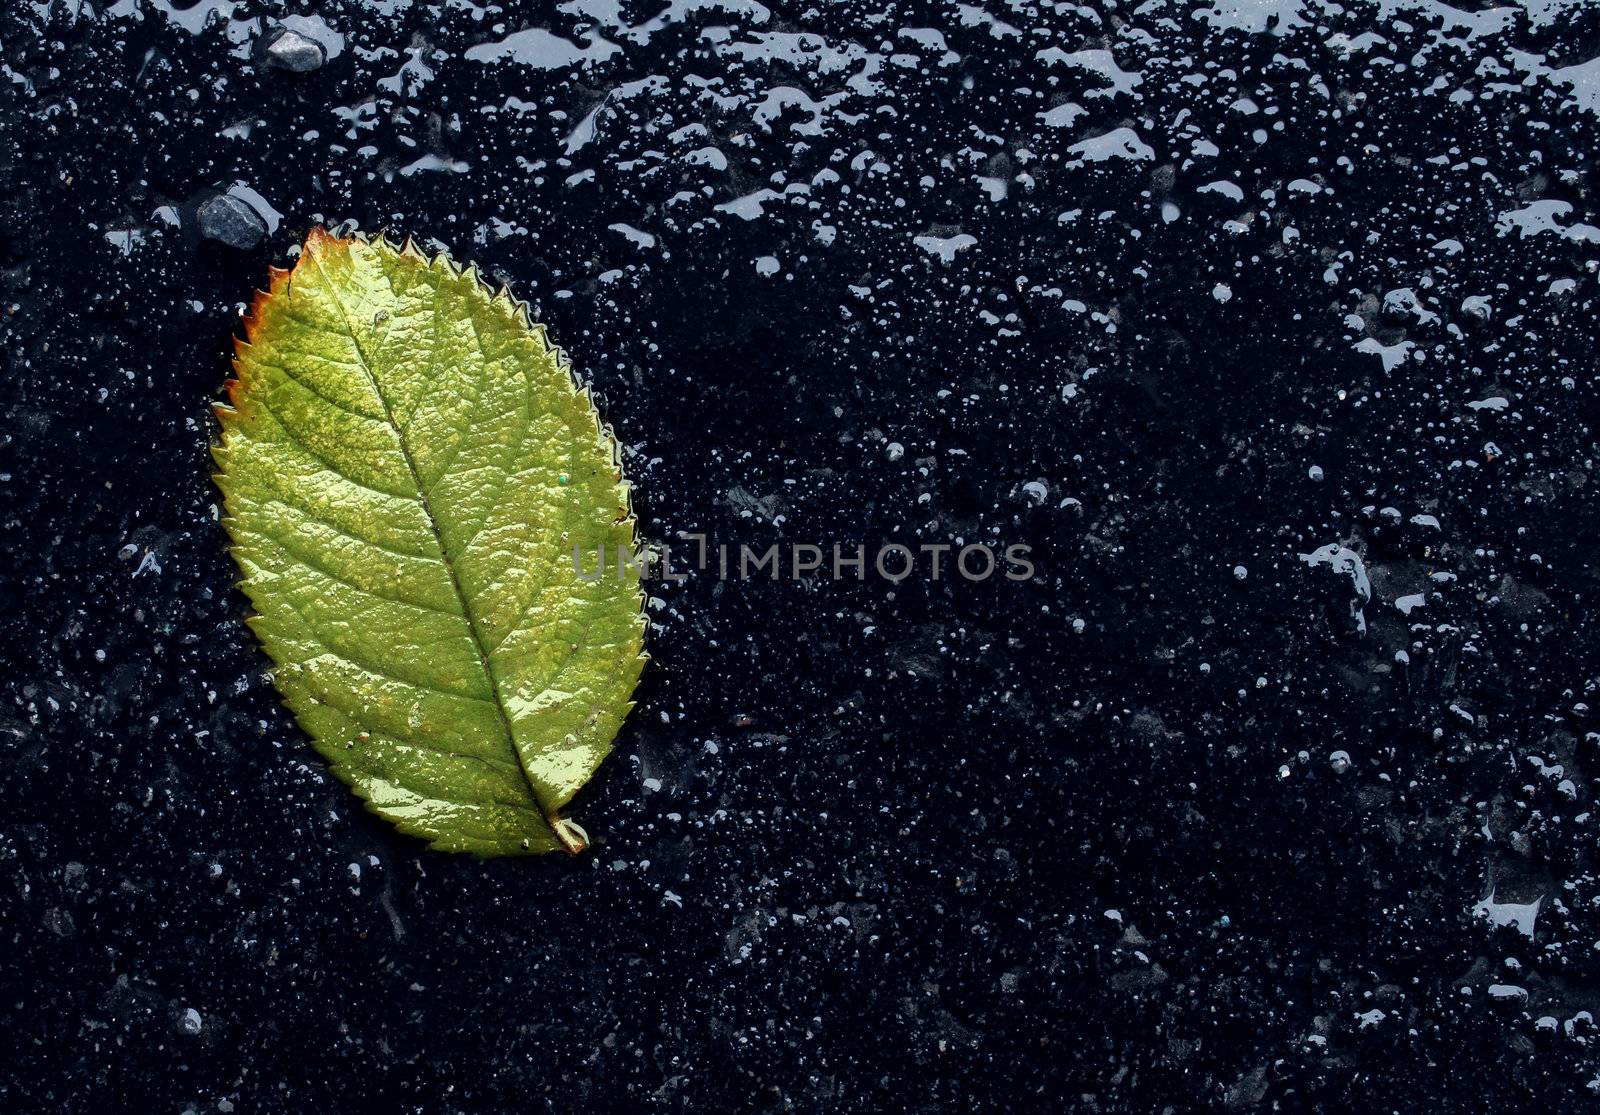 Wet single fallen green leaf on black asphalt as a symbol of renewal and hope after winter or before spring season with reflections as an icon of urban environment life.